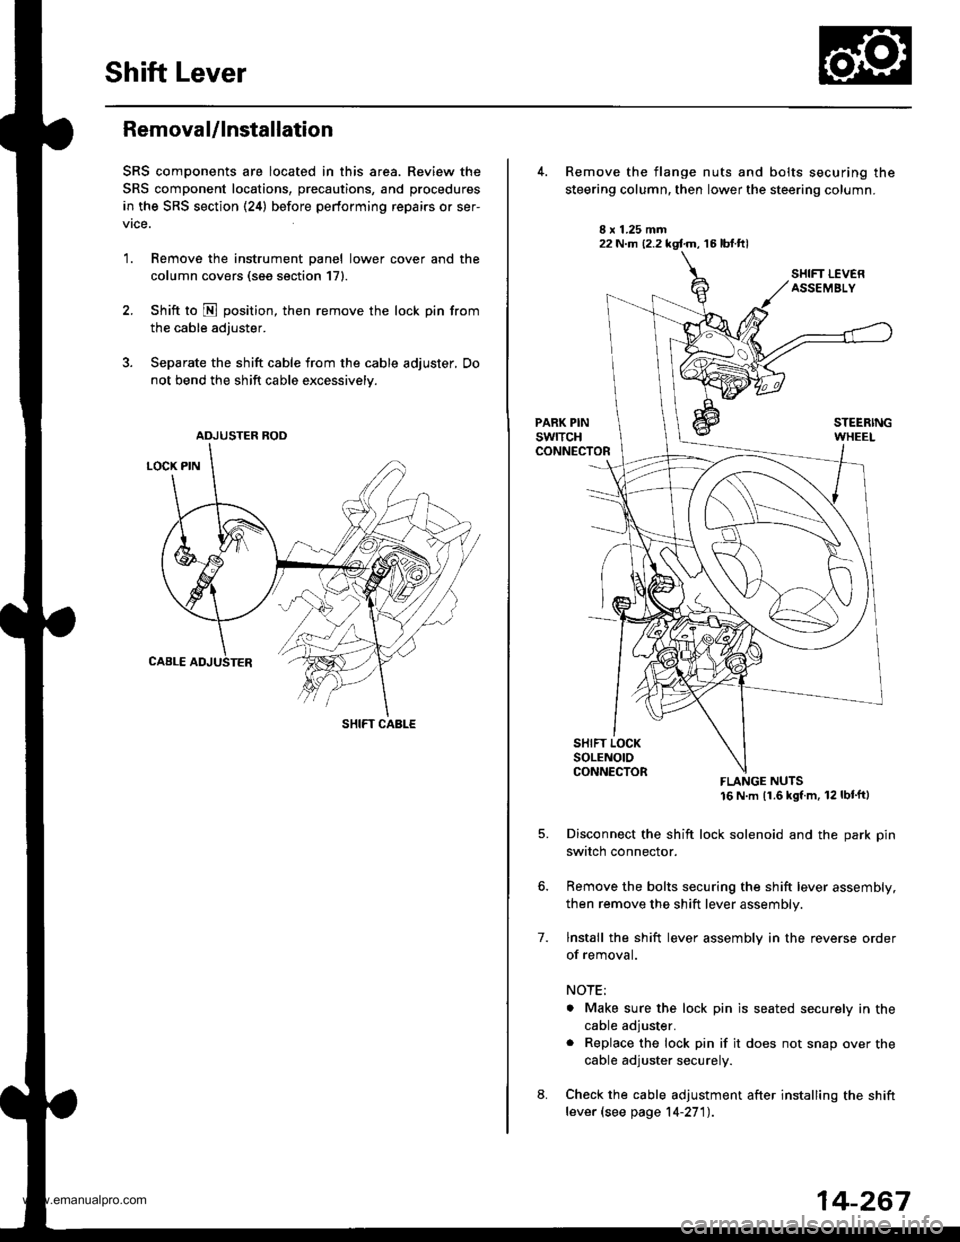 HONDA CR-V 2000 RD1-RD3 / 1.G Workshop Manual 
Shift Lever
Removal/lnstallation
SRS components are located in this area. Review the
SRS component locations, precautions, and procedures
in the SRS section (24) before performing repairs or ser-
vrc